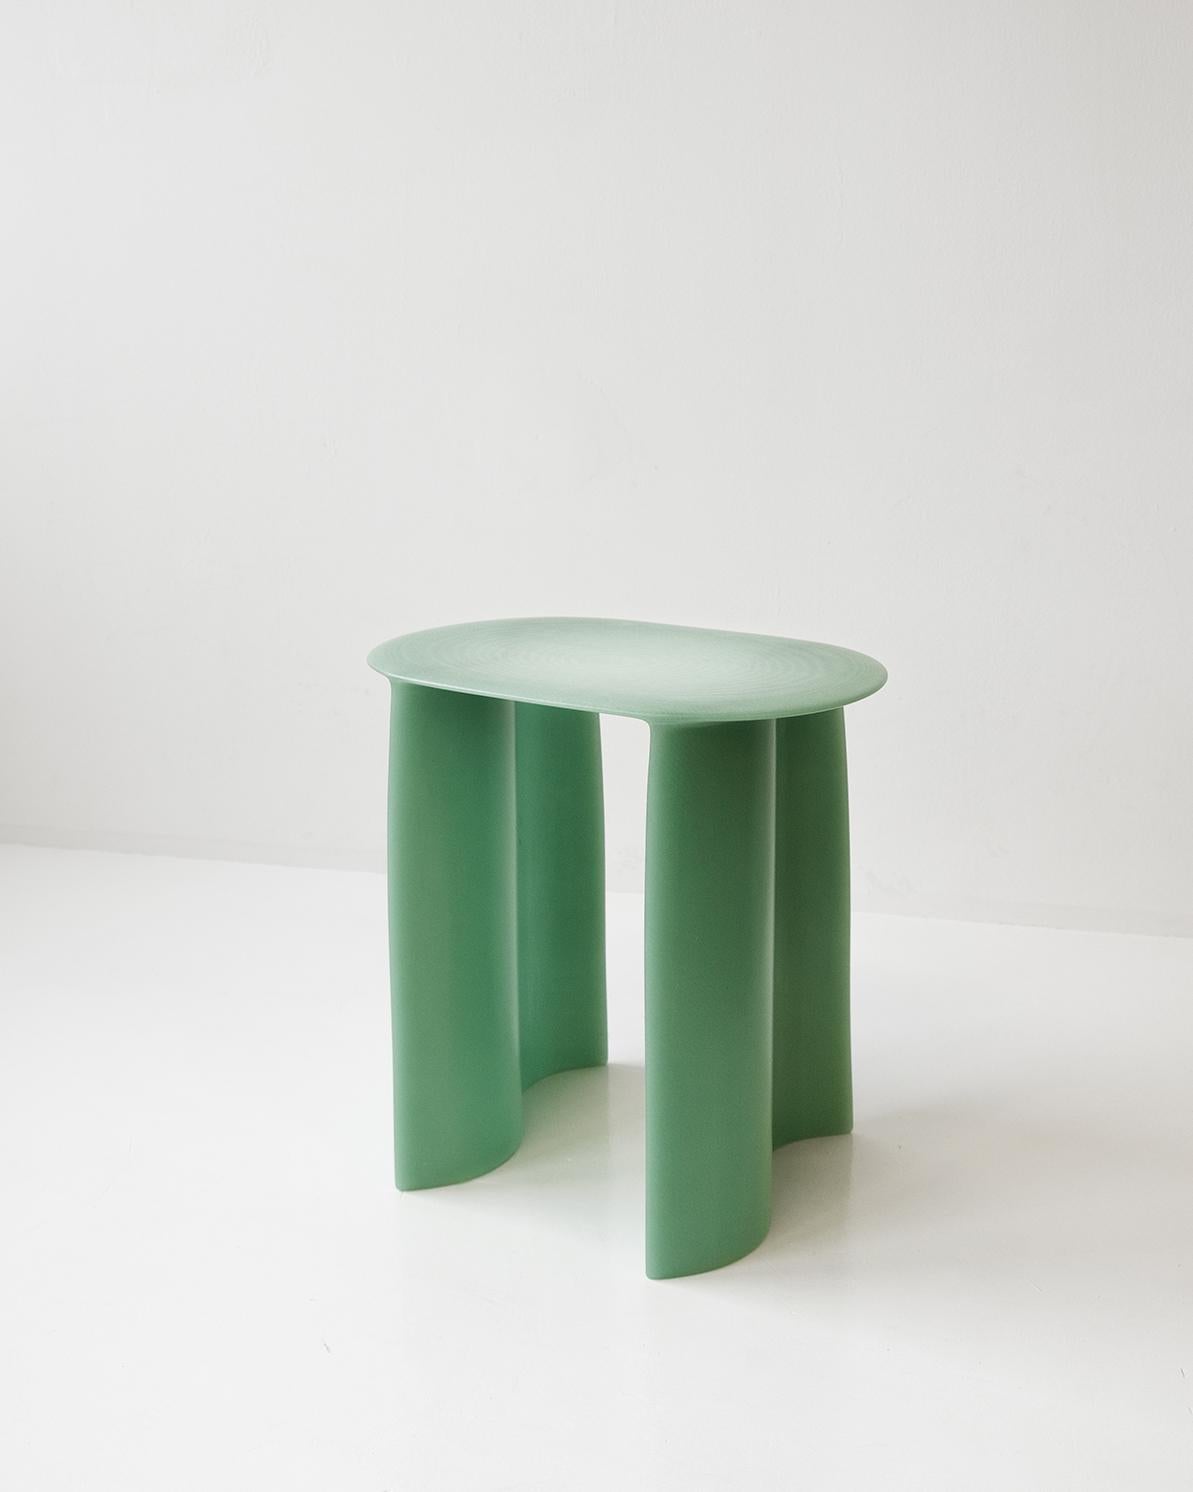 Dutch Contemporary light green Fiberglass, New Wave Side Table, by Lukas Cober For Sale